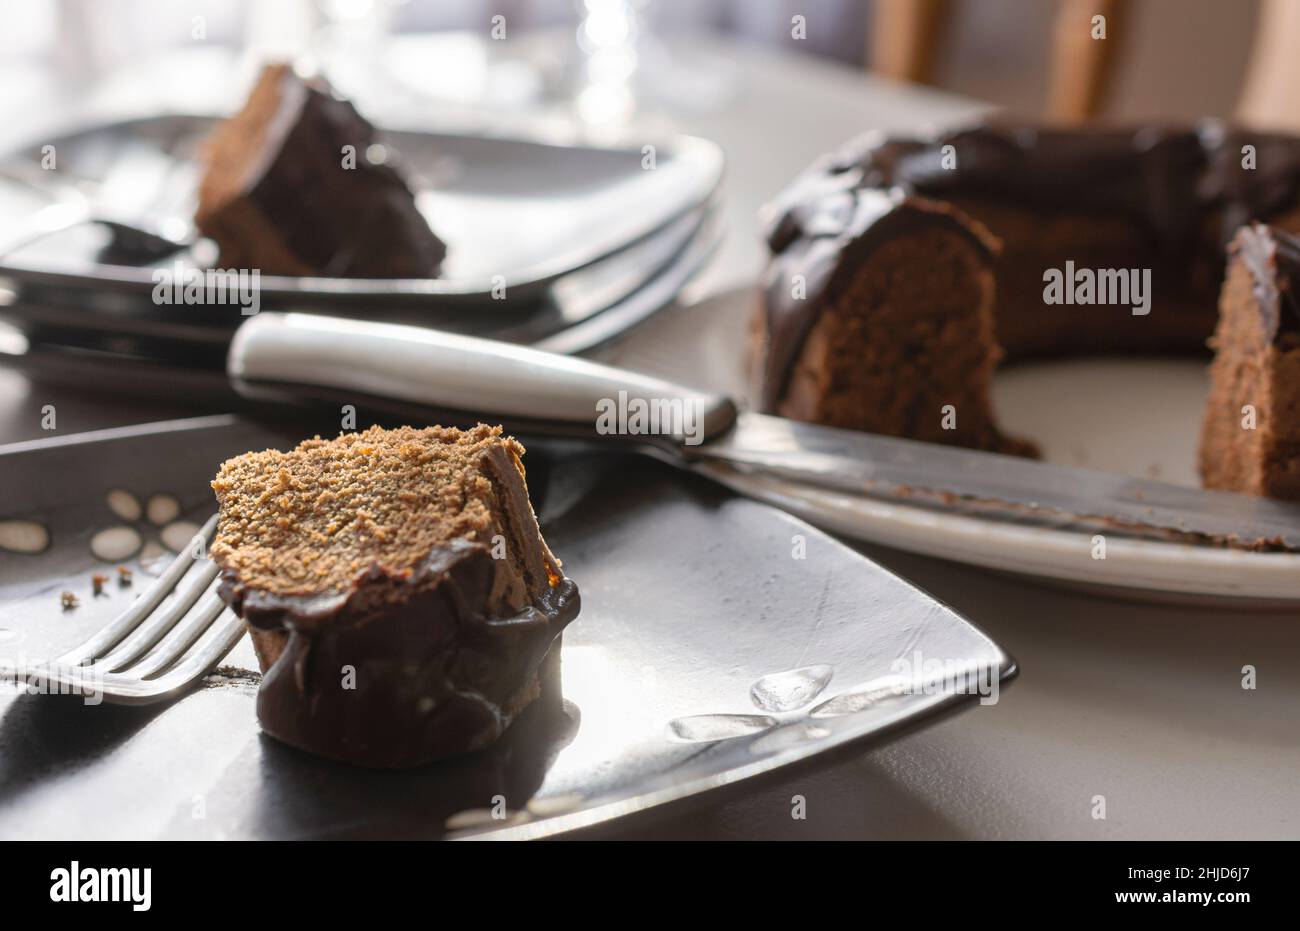 A slice of a chocolate bundt cake on a black plate with a fork.  Remainder of cake blurred in background along with an additional slice of cake on a s Stock Photo